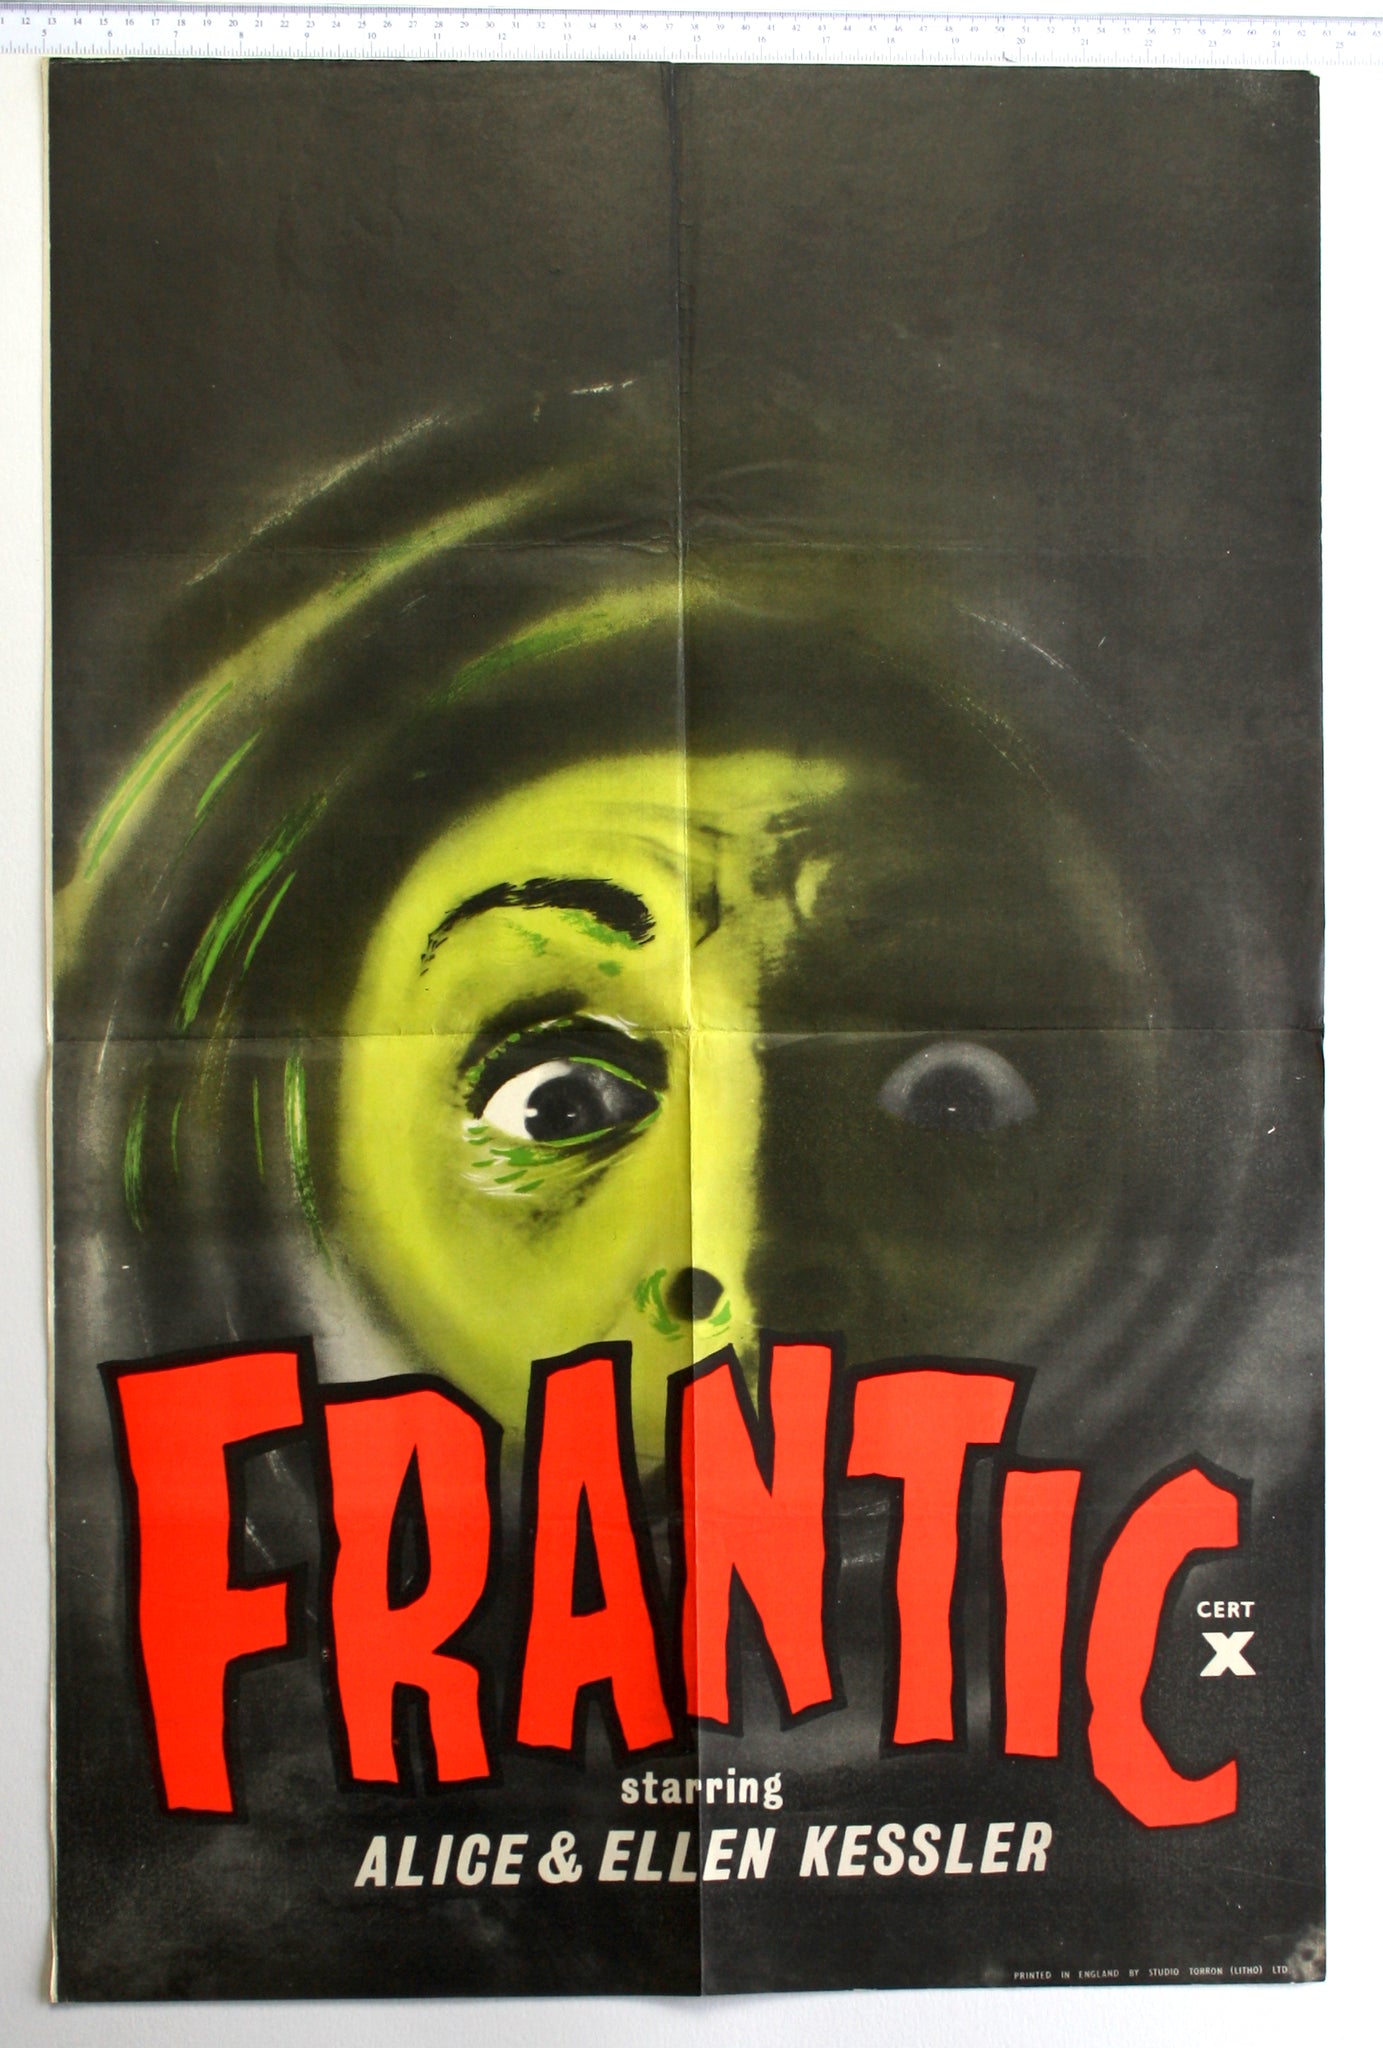 Within a black swirl, green highlights reveal a face with wide staring eyes. The title is in a rough freestyle font in red.